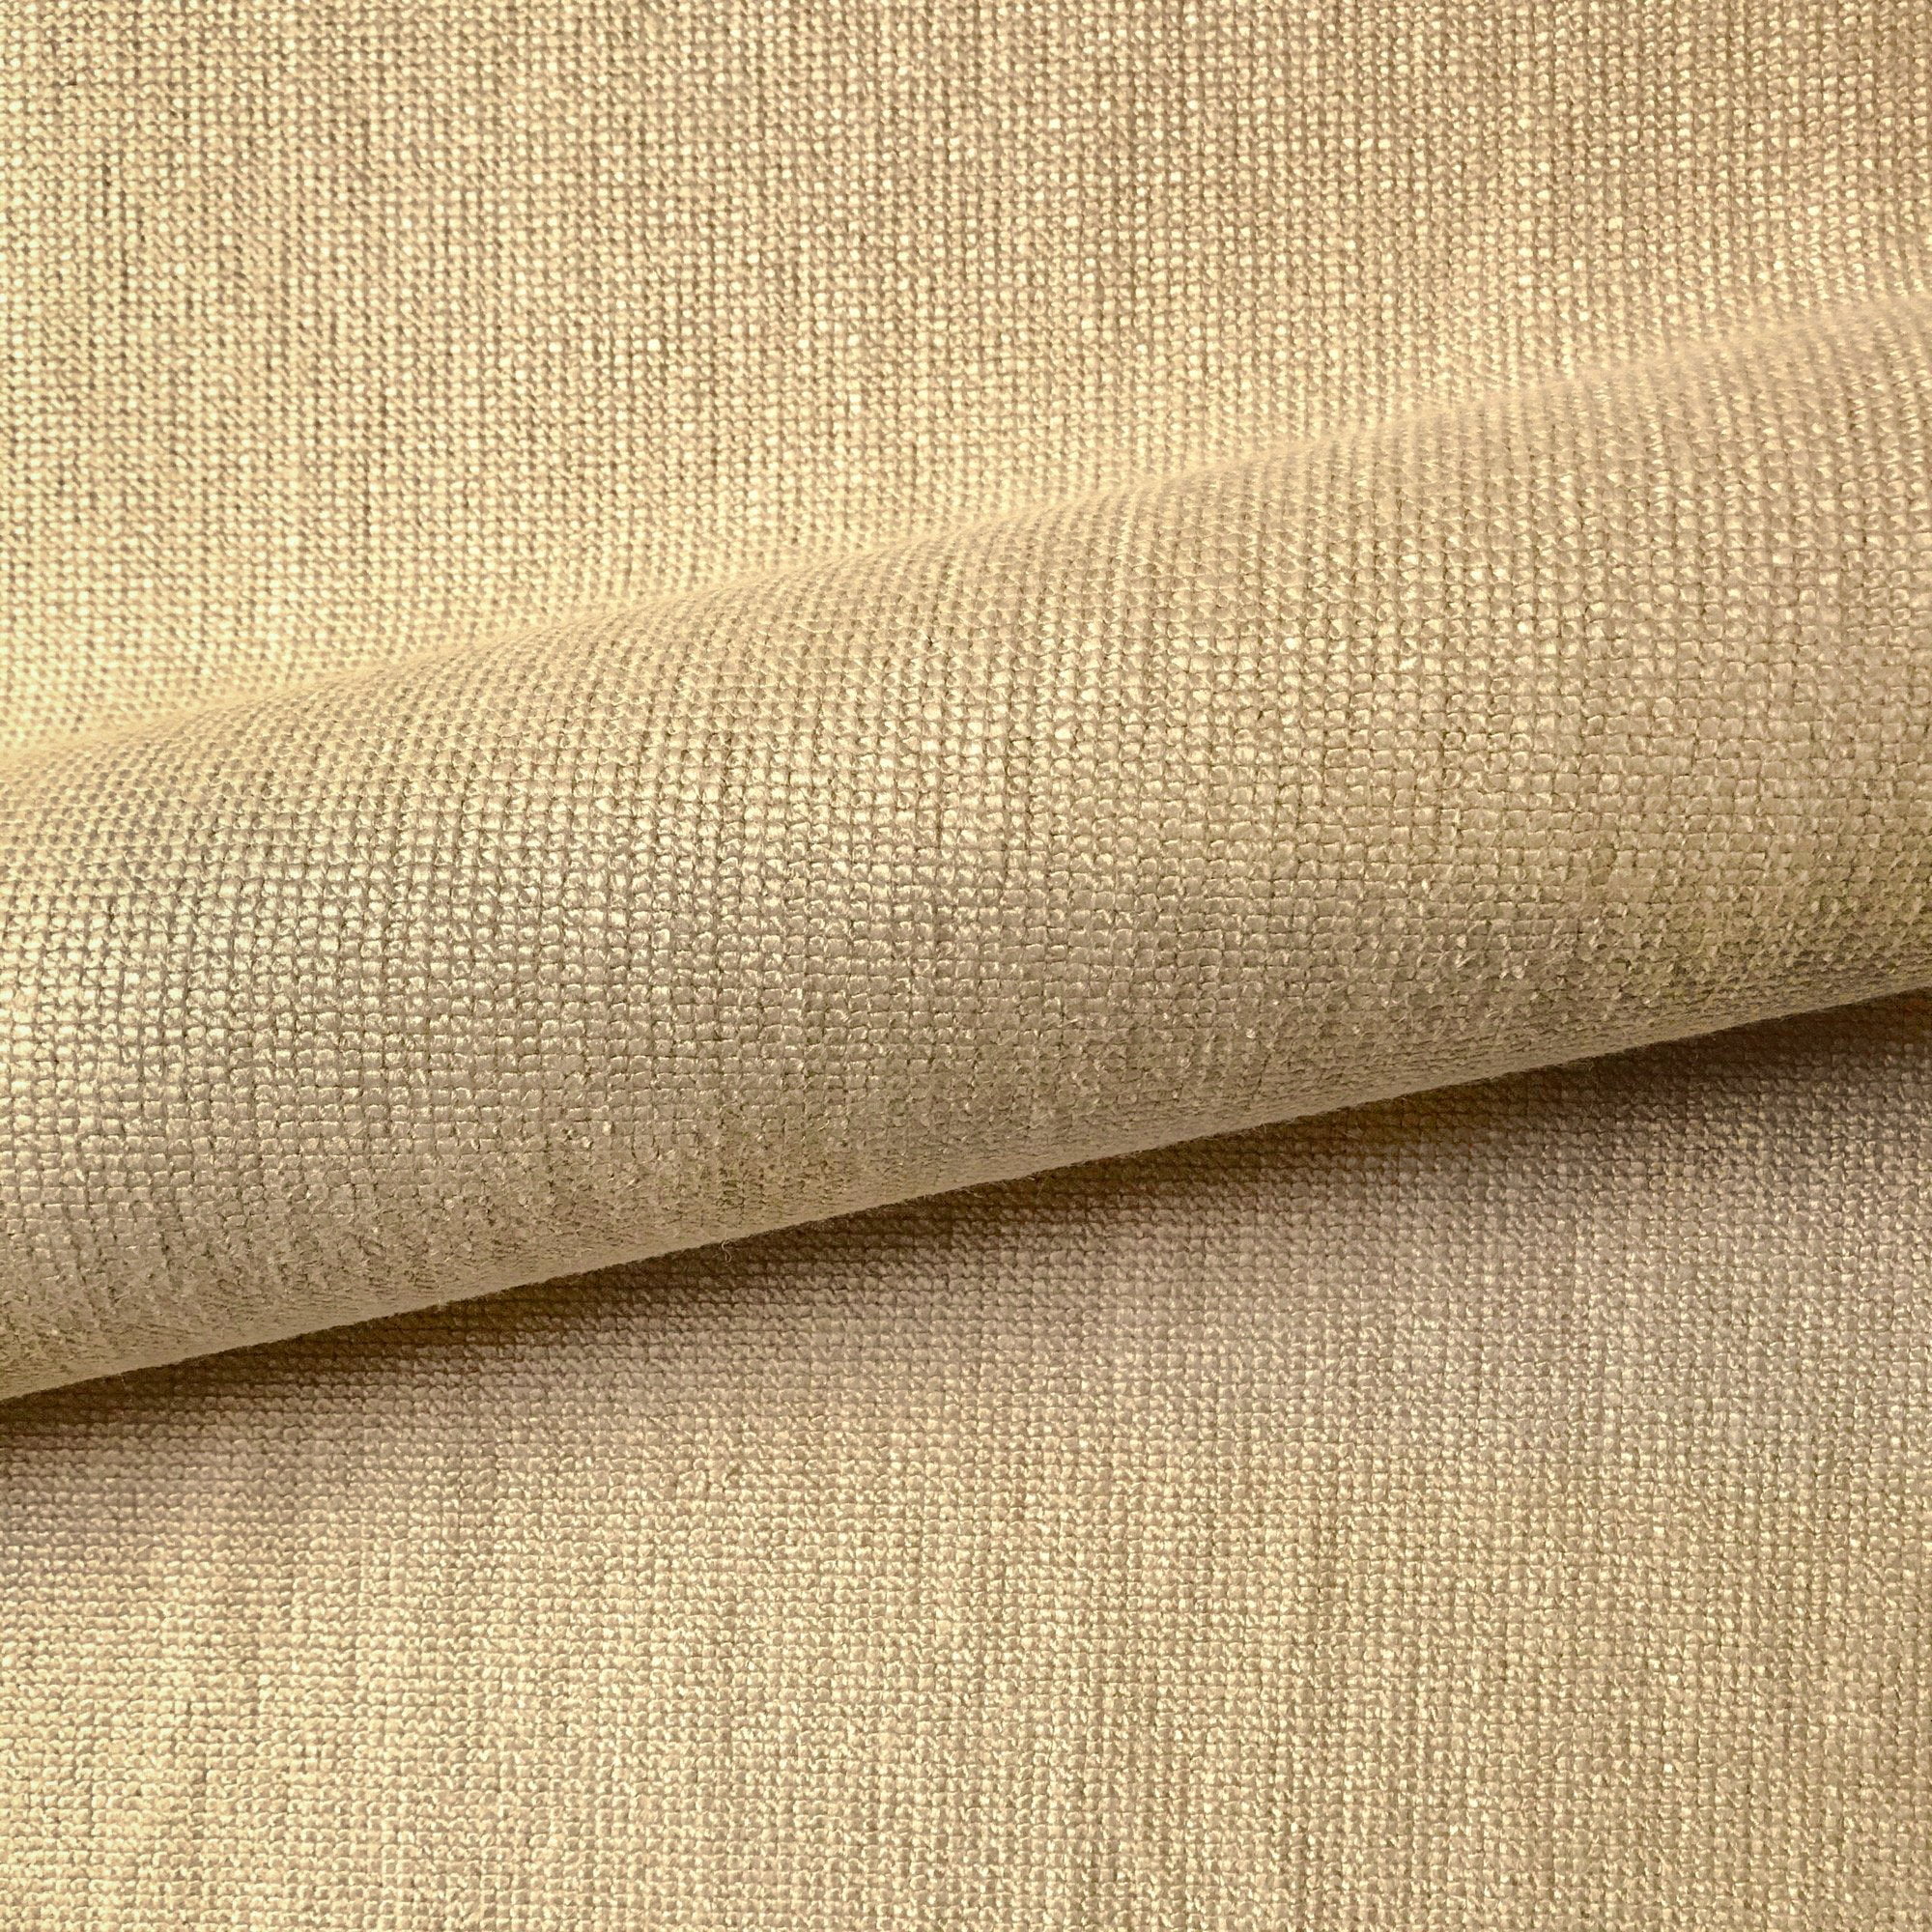 Parchment Country Textured Woven Upholstery Fabric 60